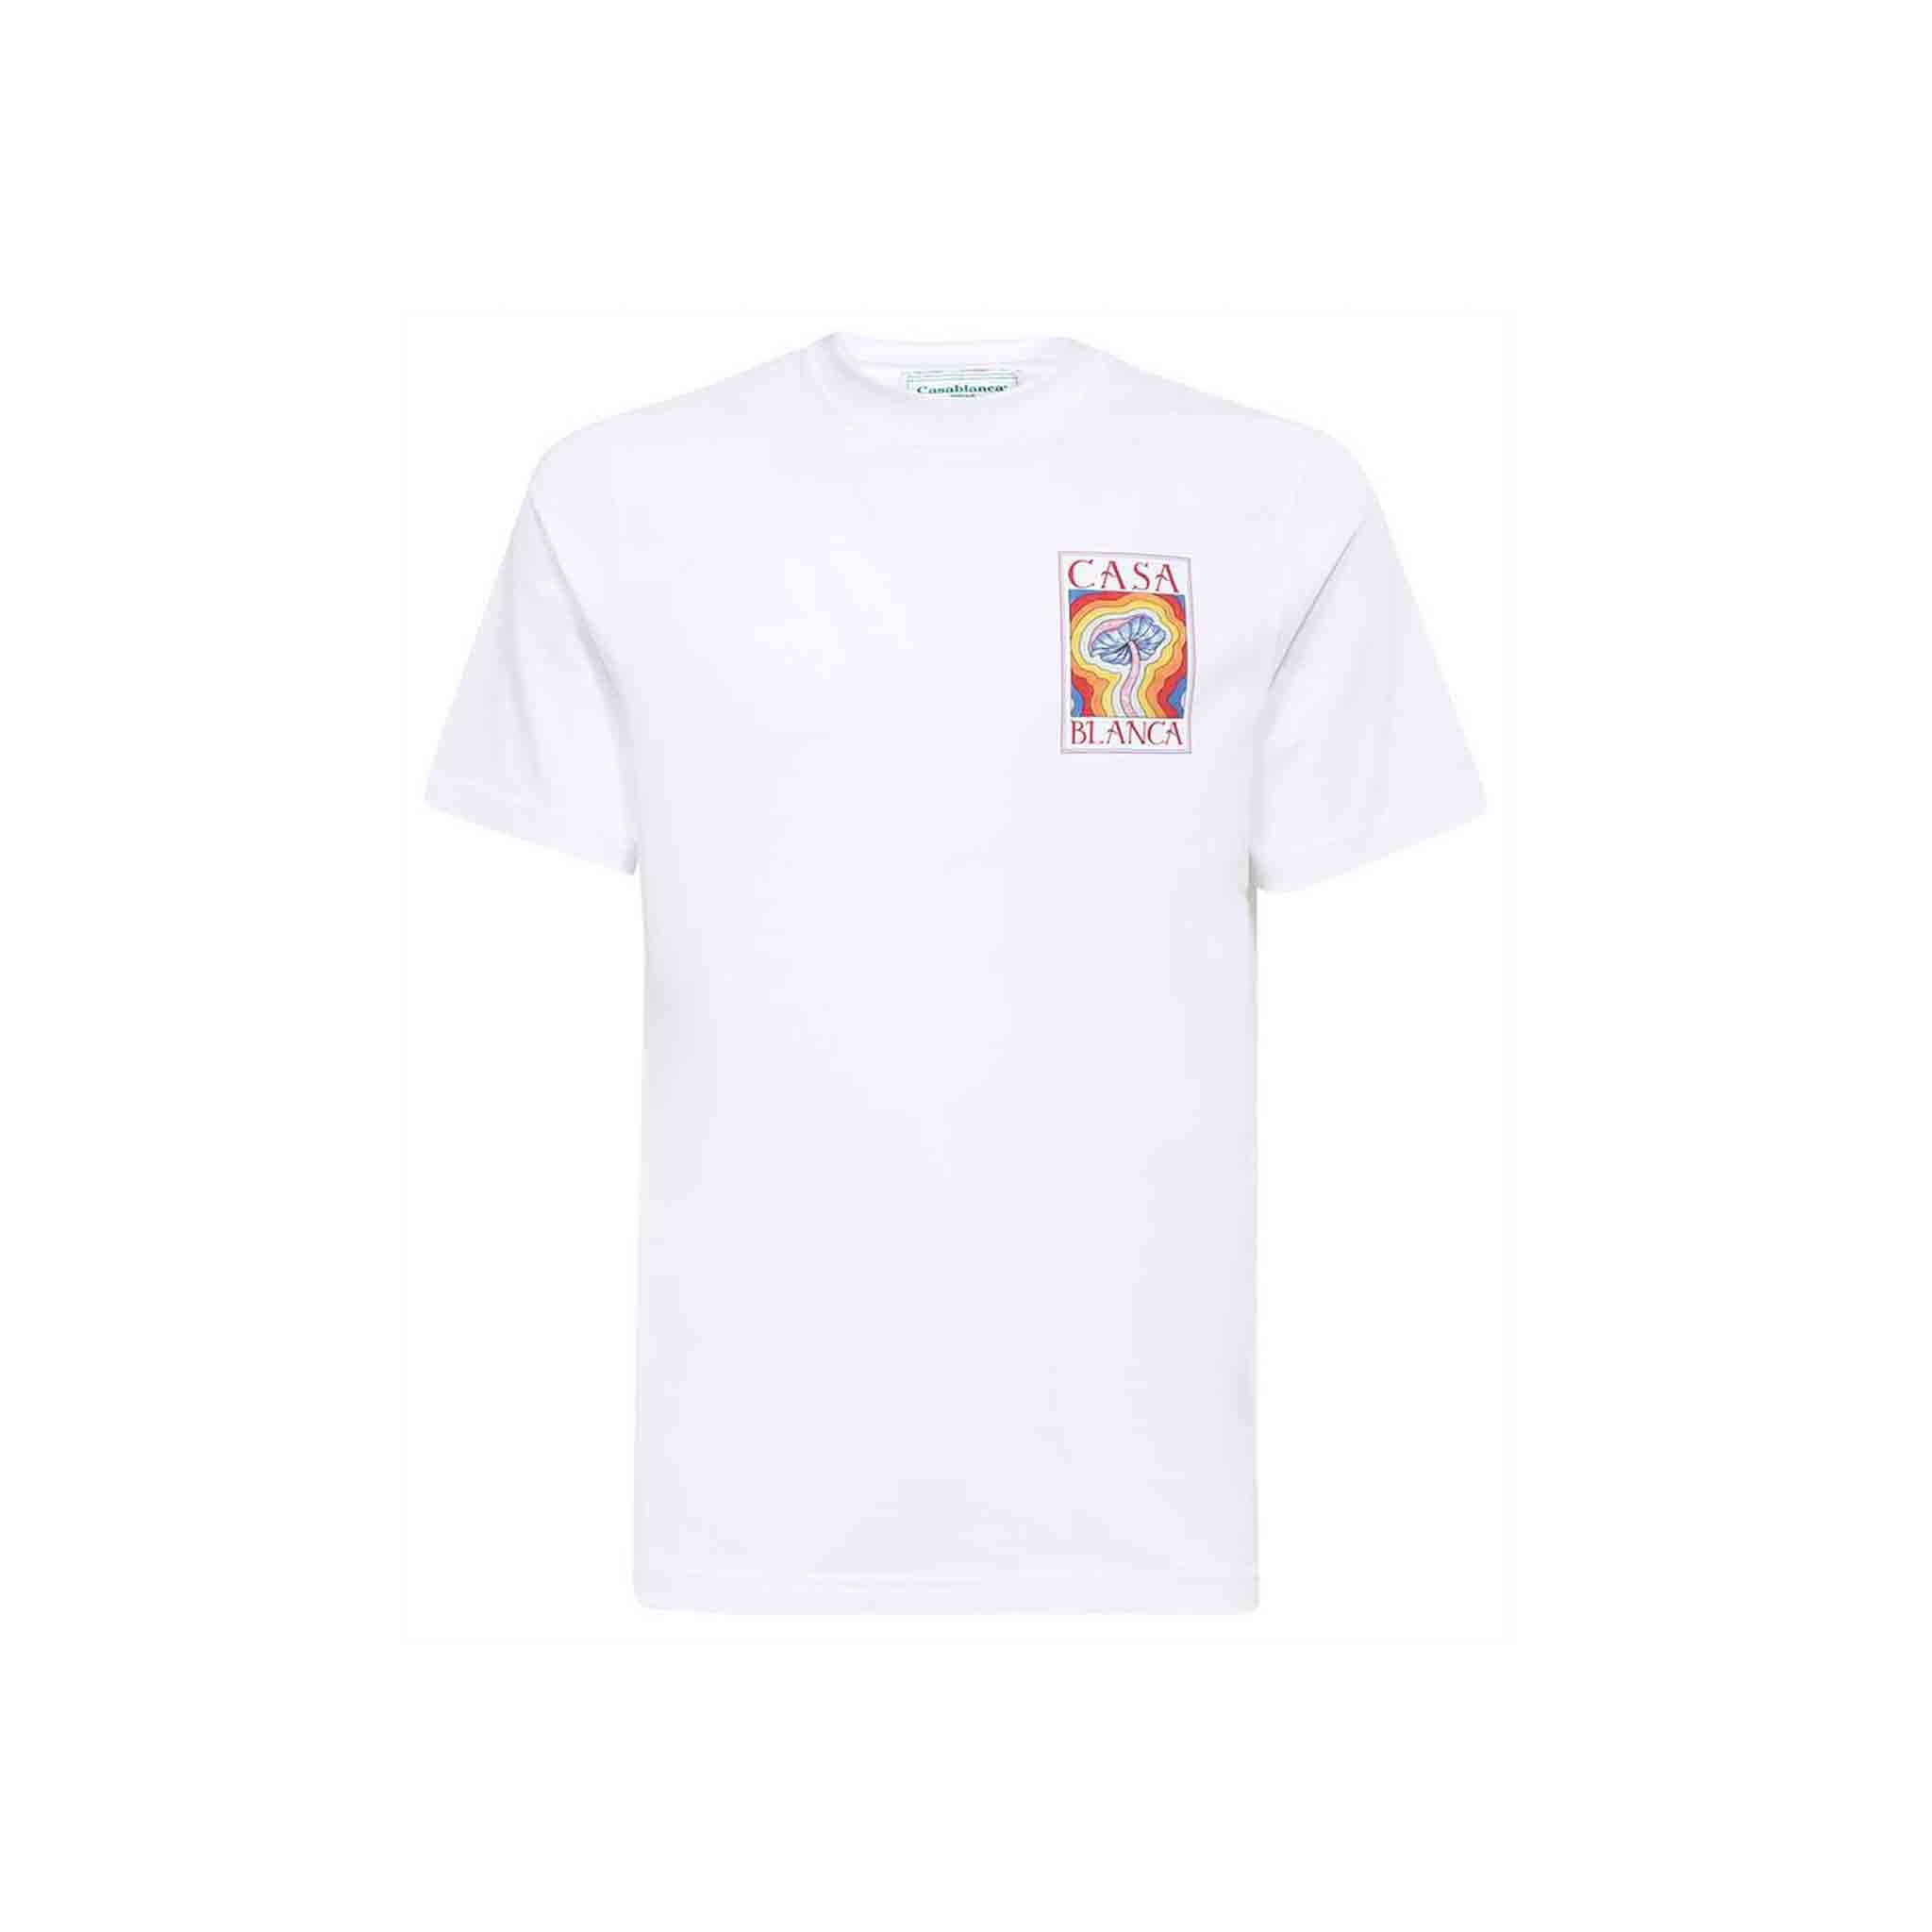 Casa Blanca Mind Vibrations T-Shirt in White